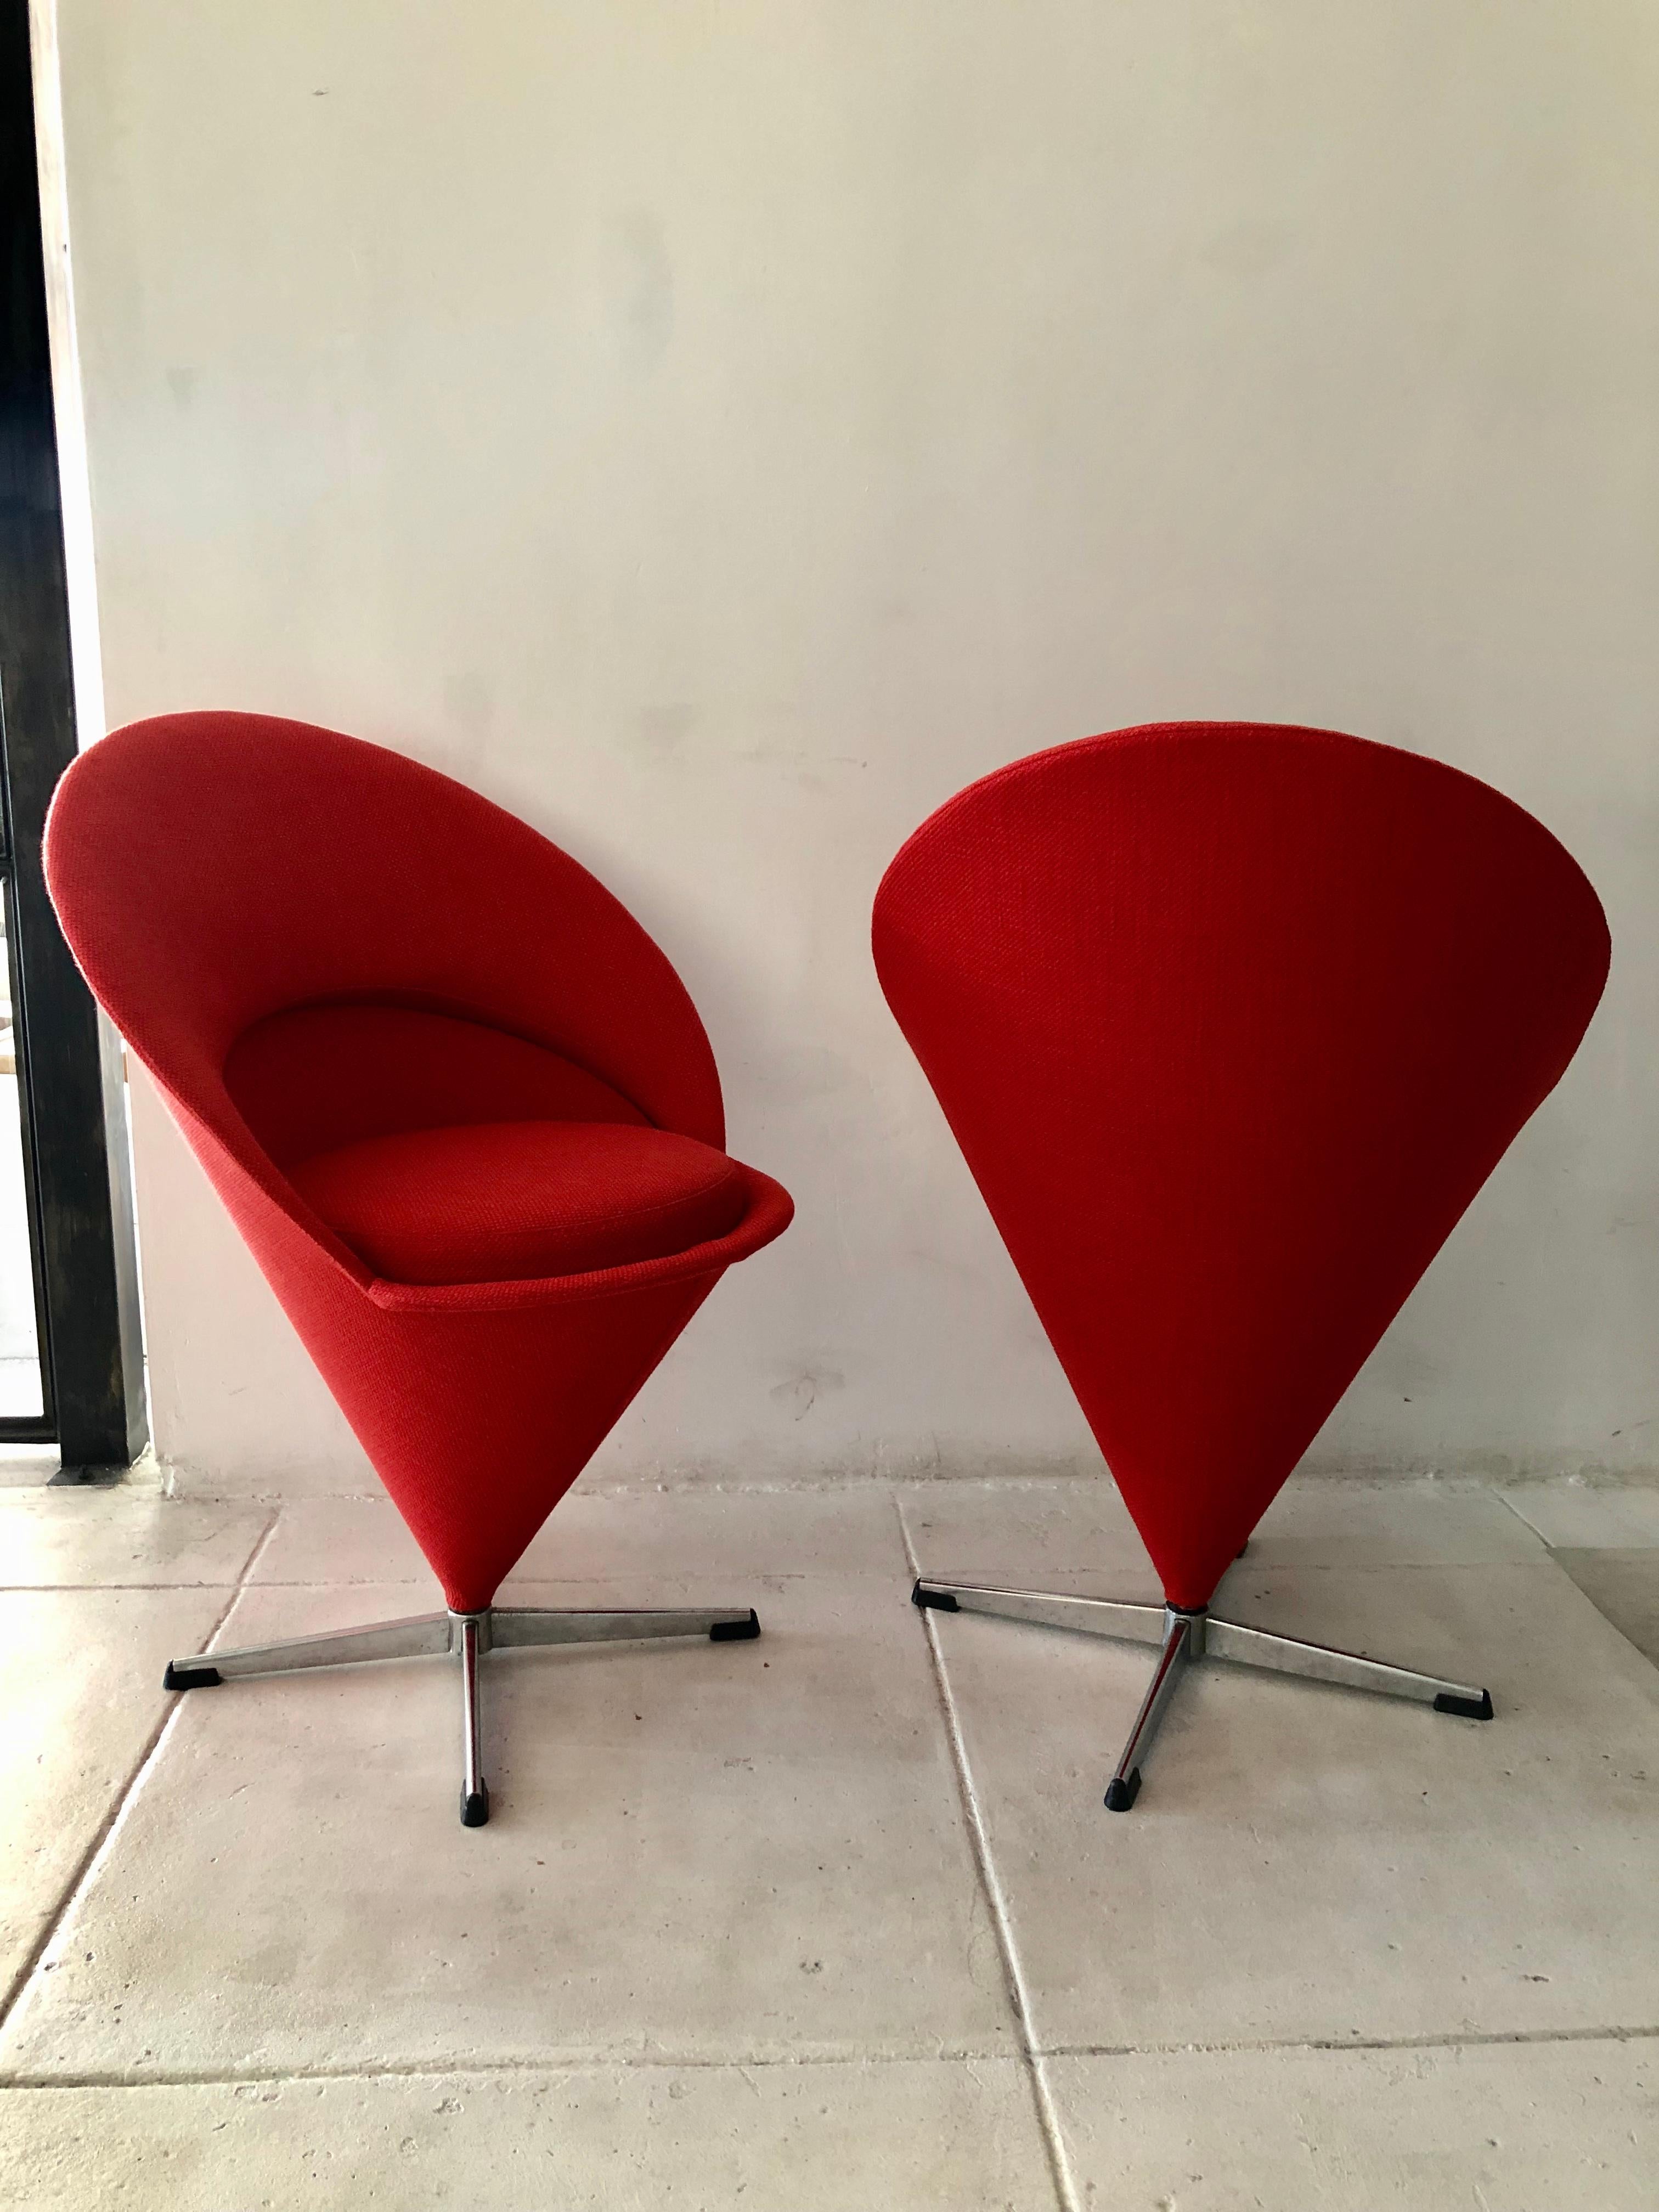 Pair of Verner Panton cone chairs. Made by Frem Rojle, Denmark, 1958. Upholstery over steel, chrome-plated steel.